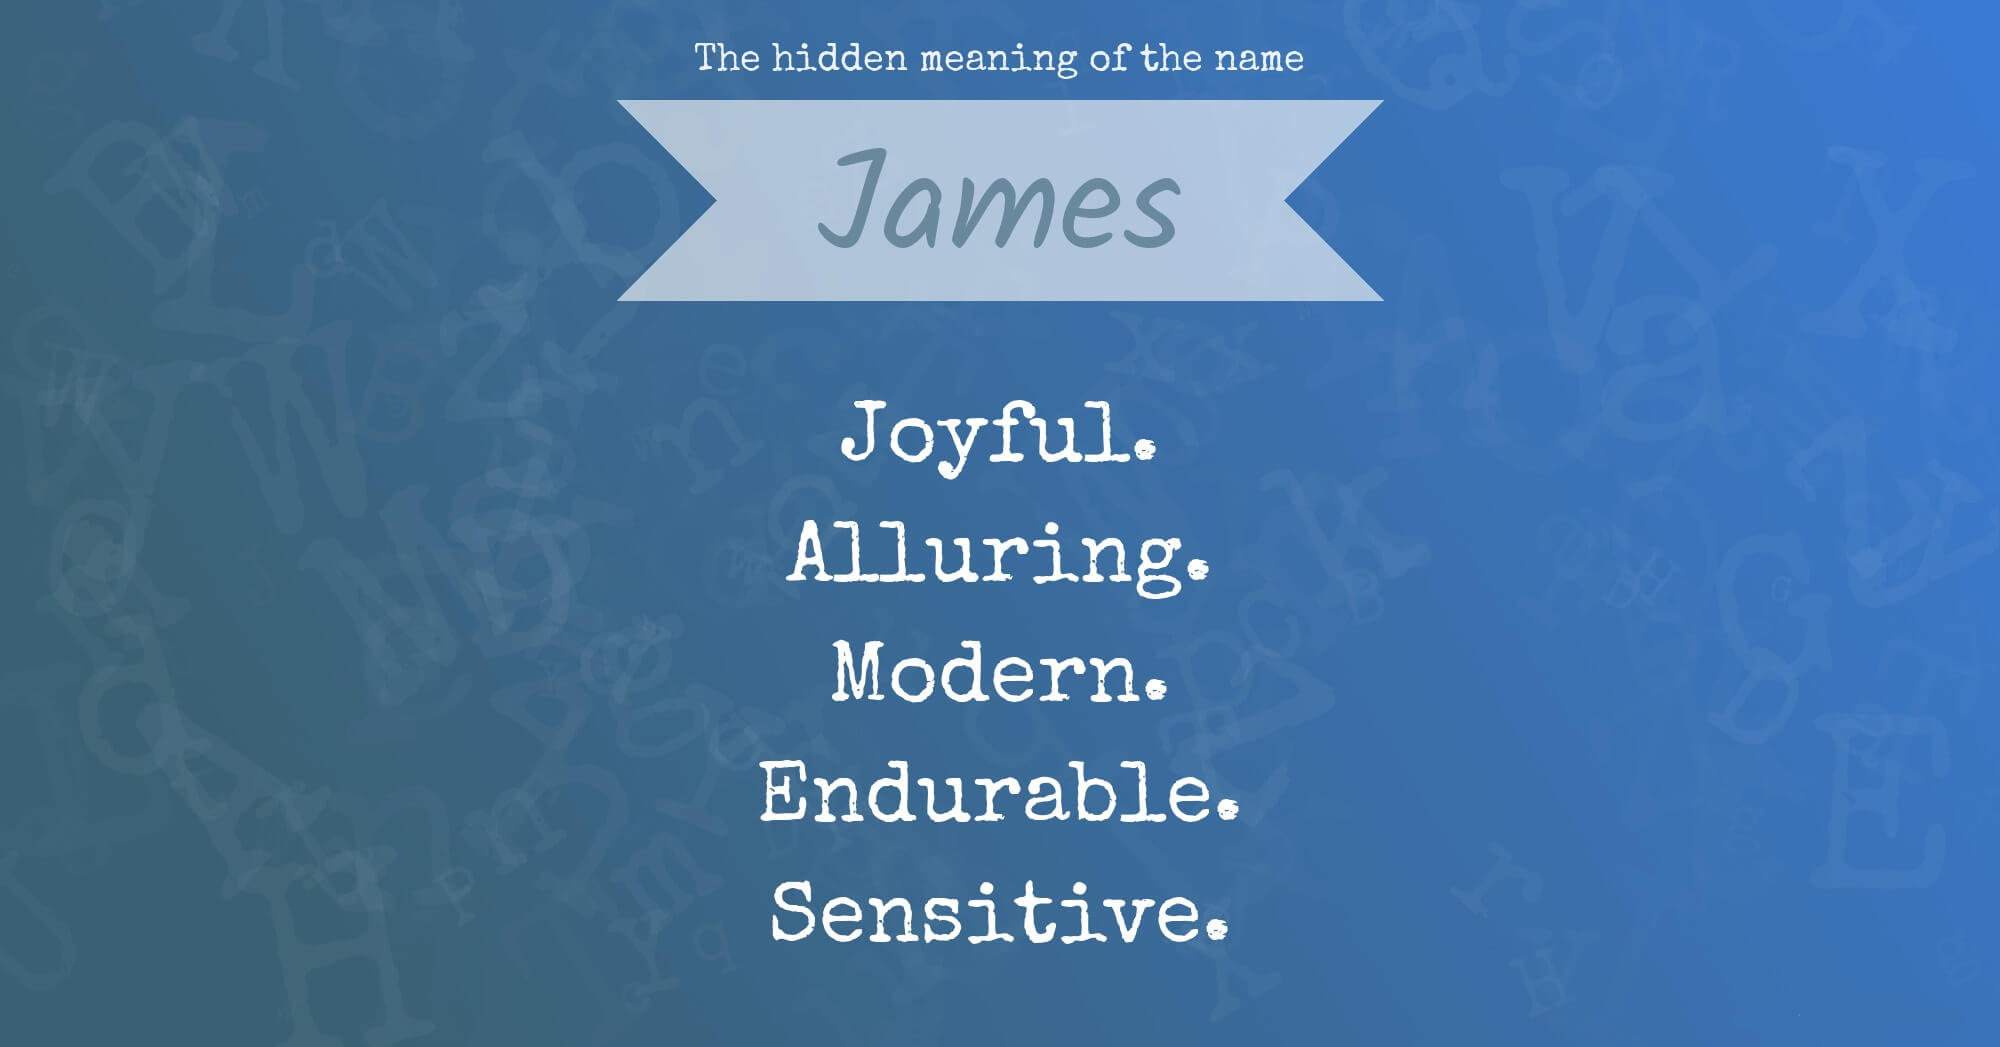 The Hidden Meaning of The Name James